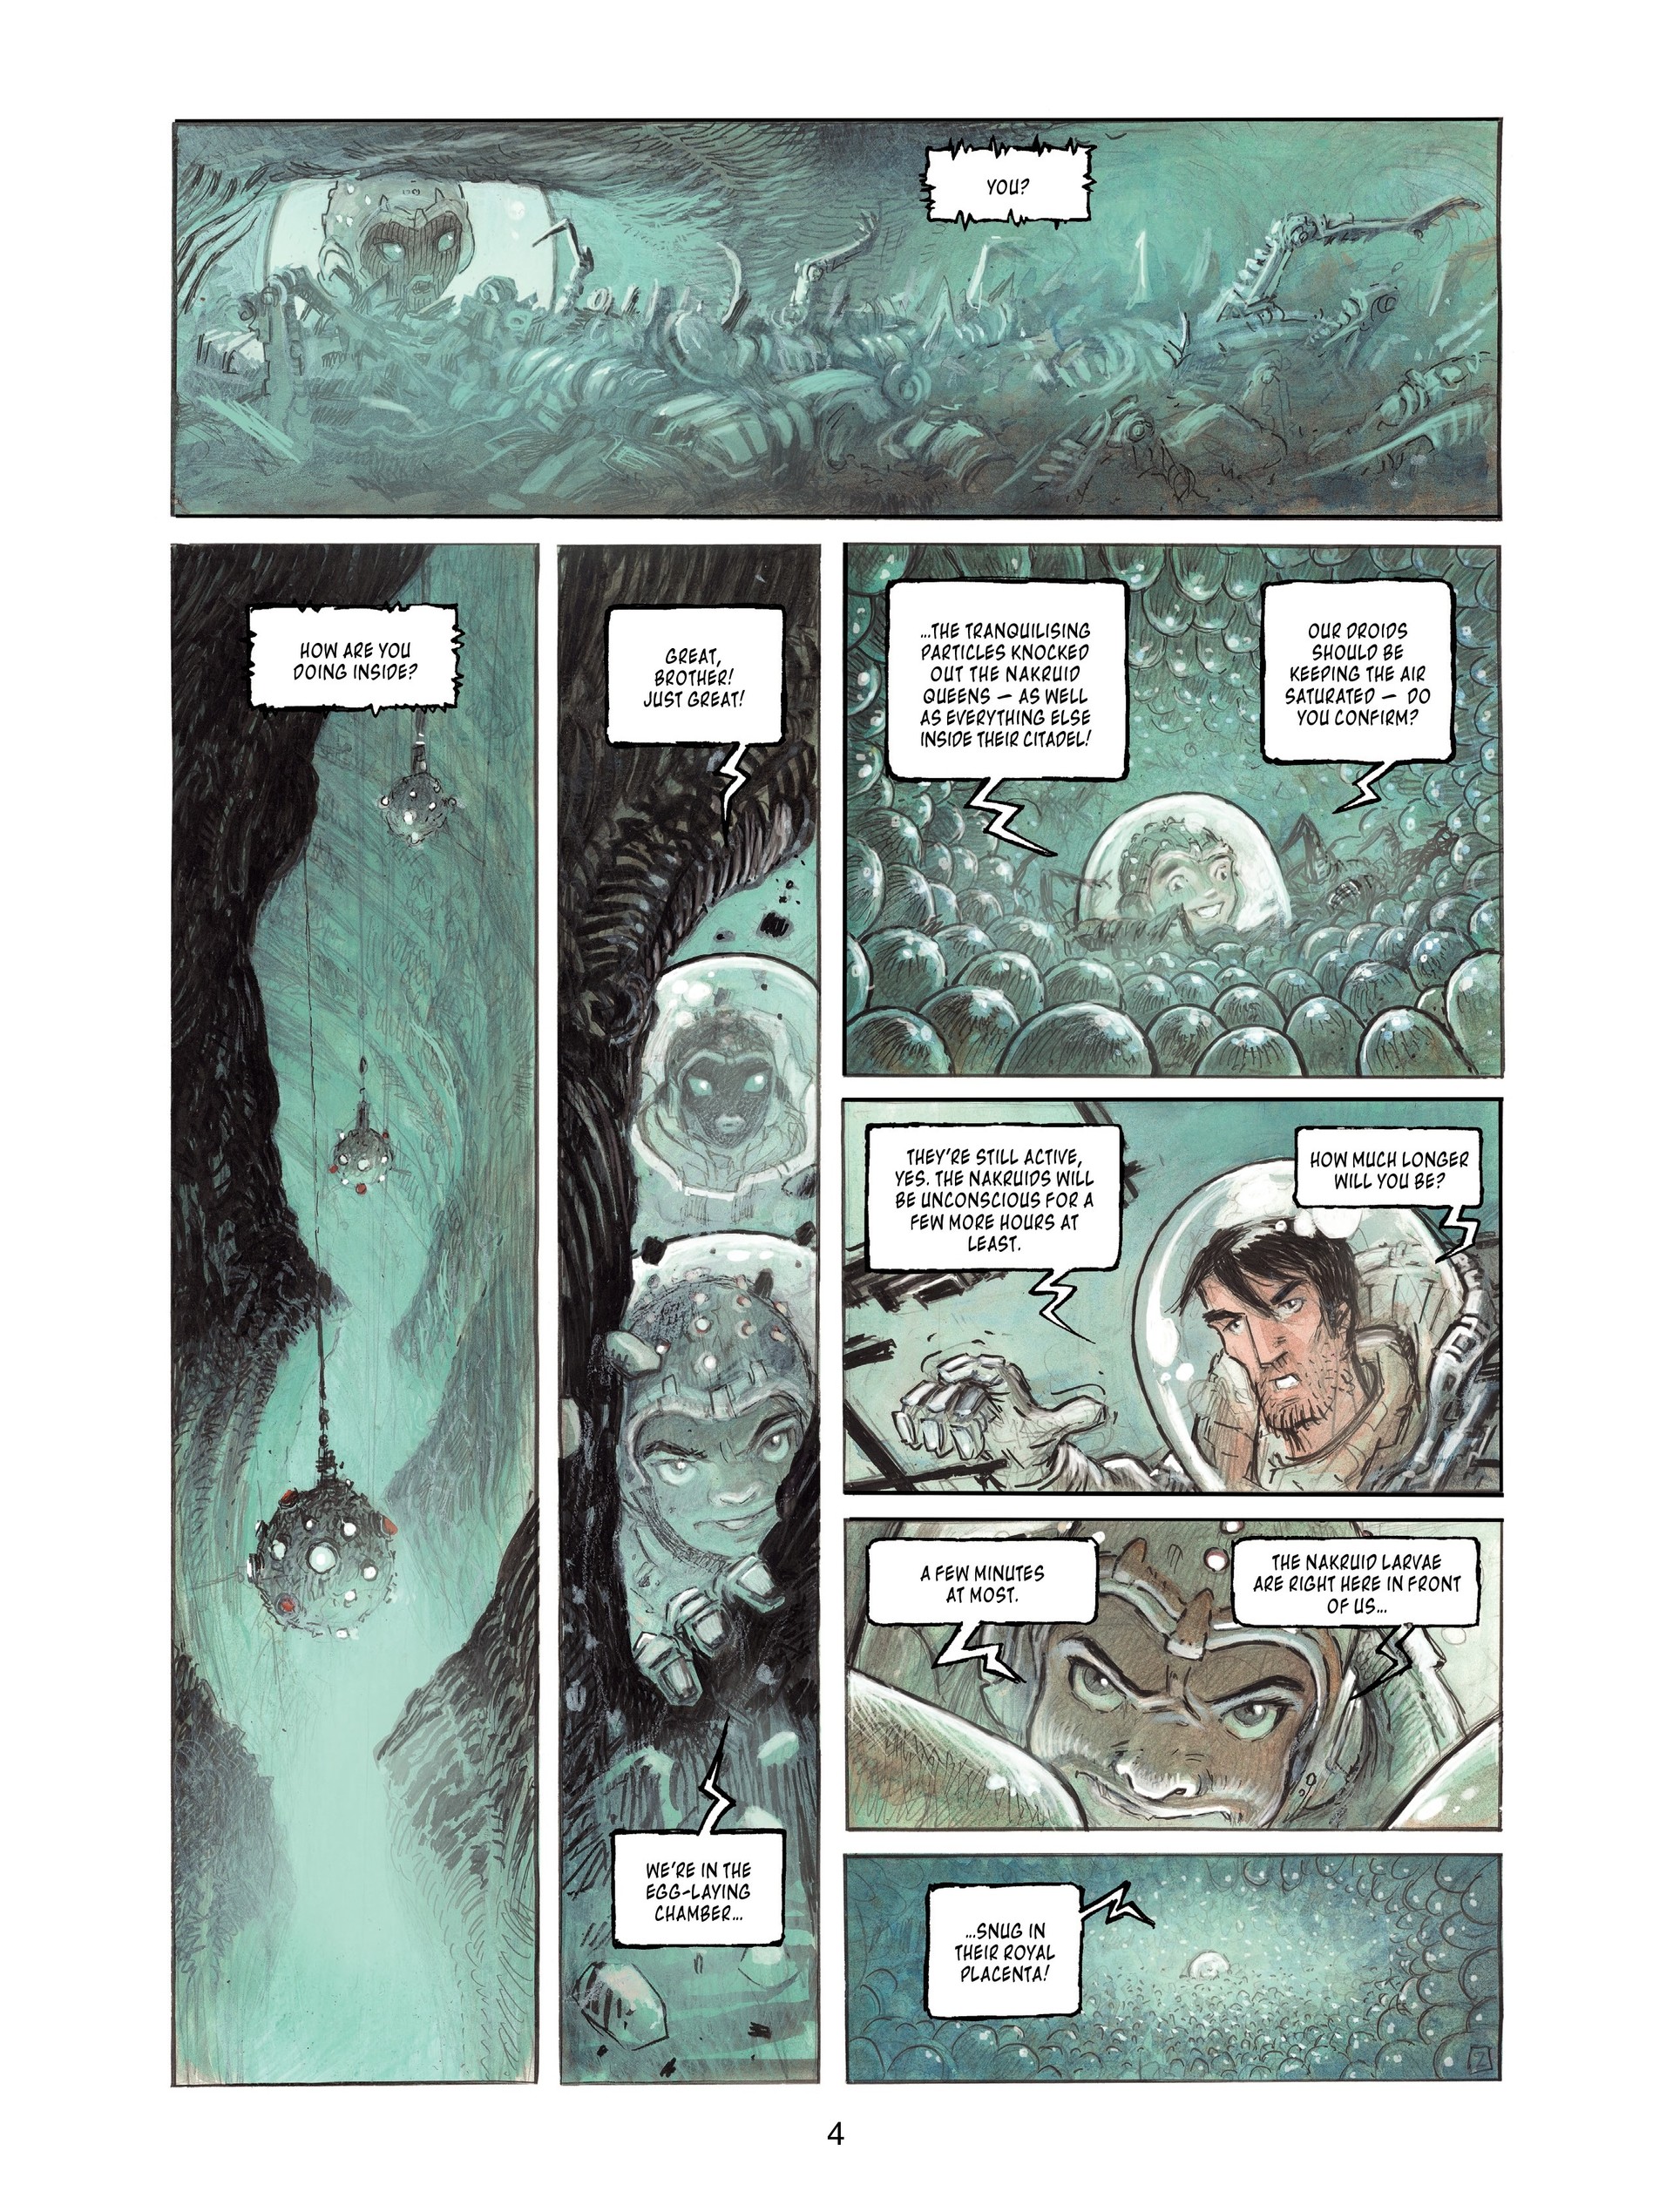 Orbital (2009-): Chapter 7 - Page 5